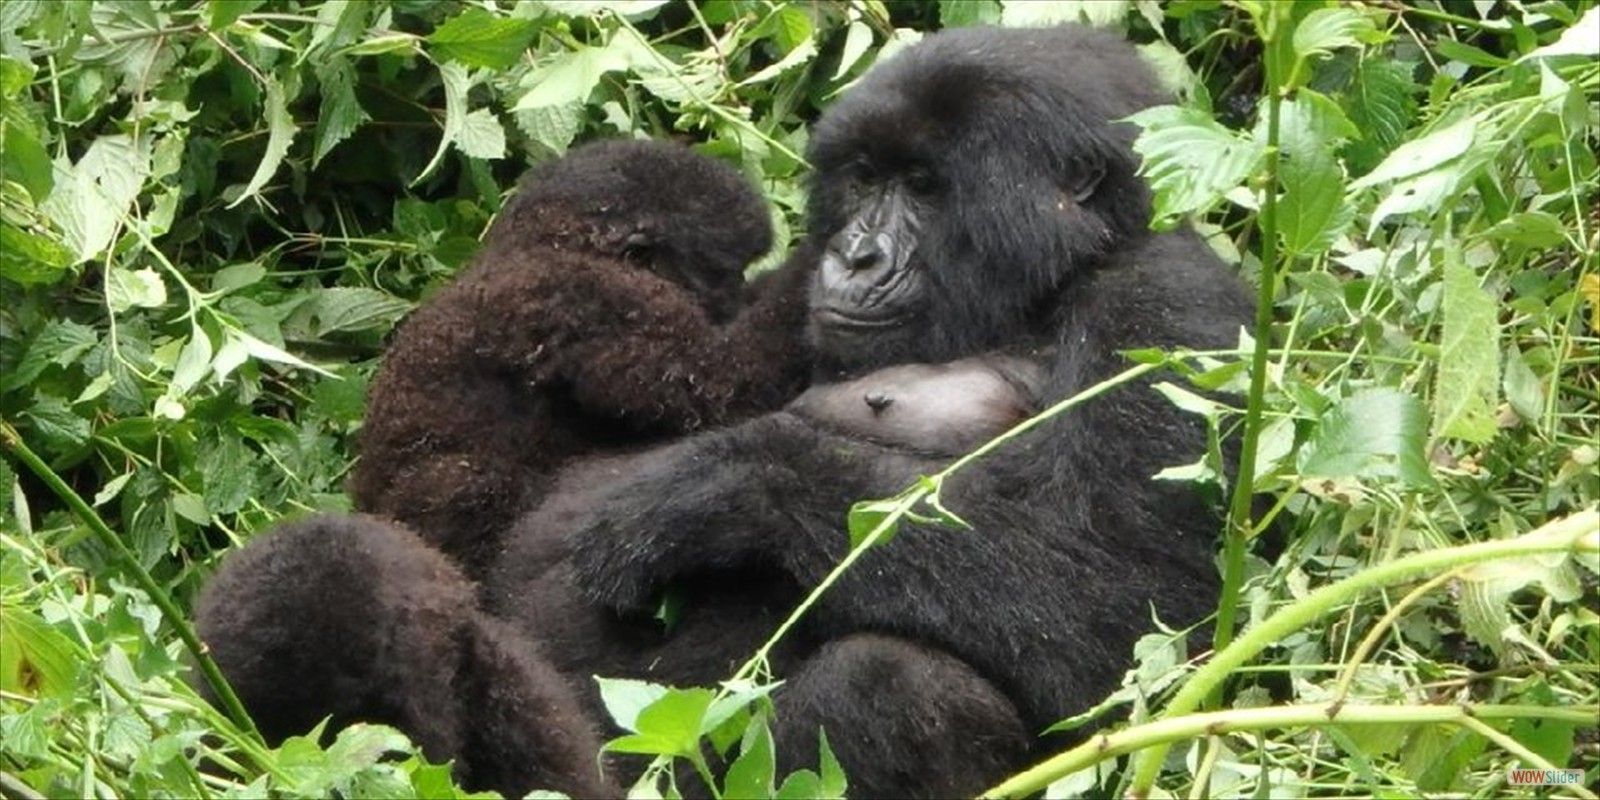 GORILLA SAFARIS RWANDA VOLCONOES NATIONAL PARK, ATTRACTIONS, ACTIVITIES, WHERE TO STAY, WHAT TO DO, VOLCANOES, NATIONAL, PARK, RWANDA,TOURIST, BISATE LODGE, GOVERNORS LODGE, CAR HIRE, RENTAL, PERMITS, WHAT TO BRING, SEE, SABYINYO SILVERBACK LODGE